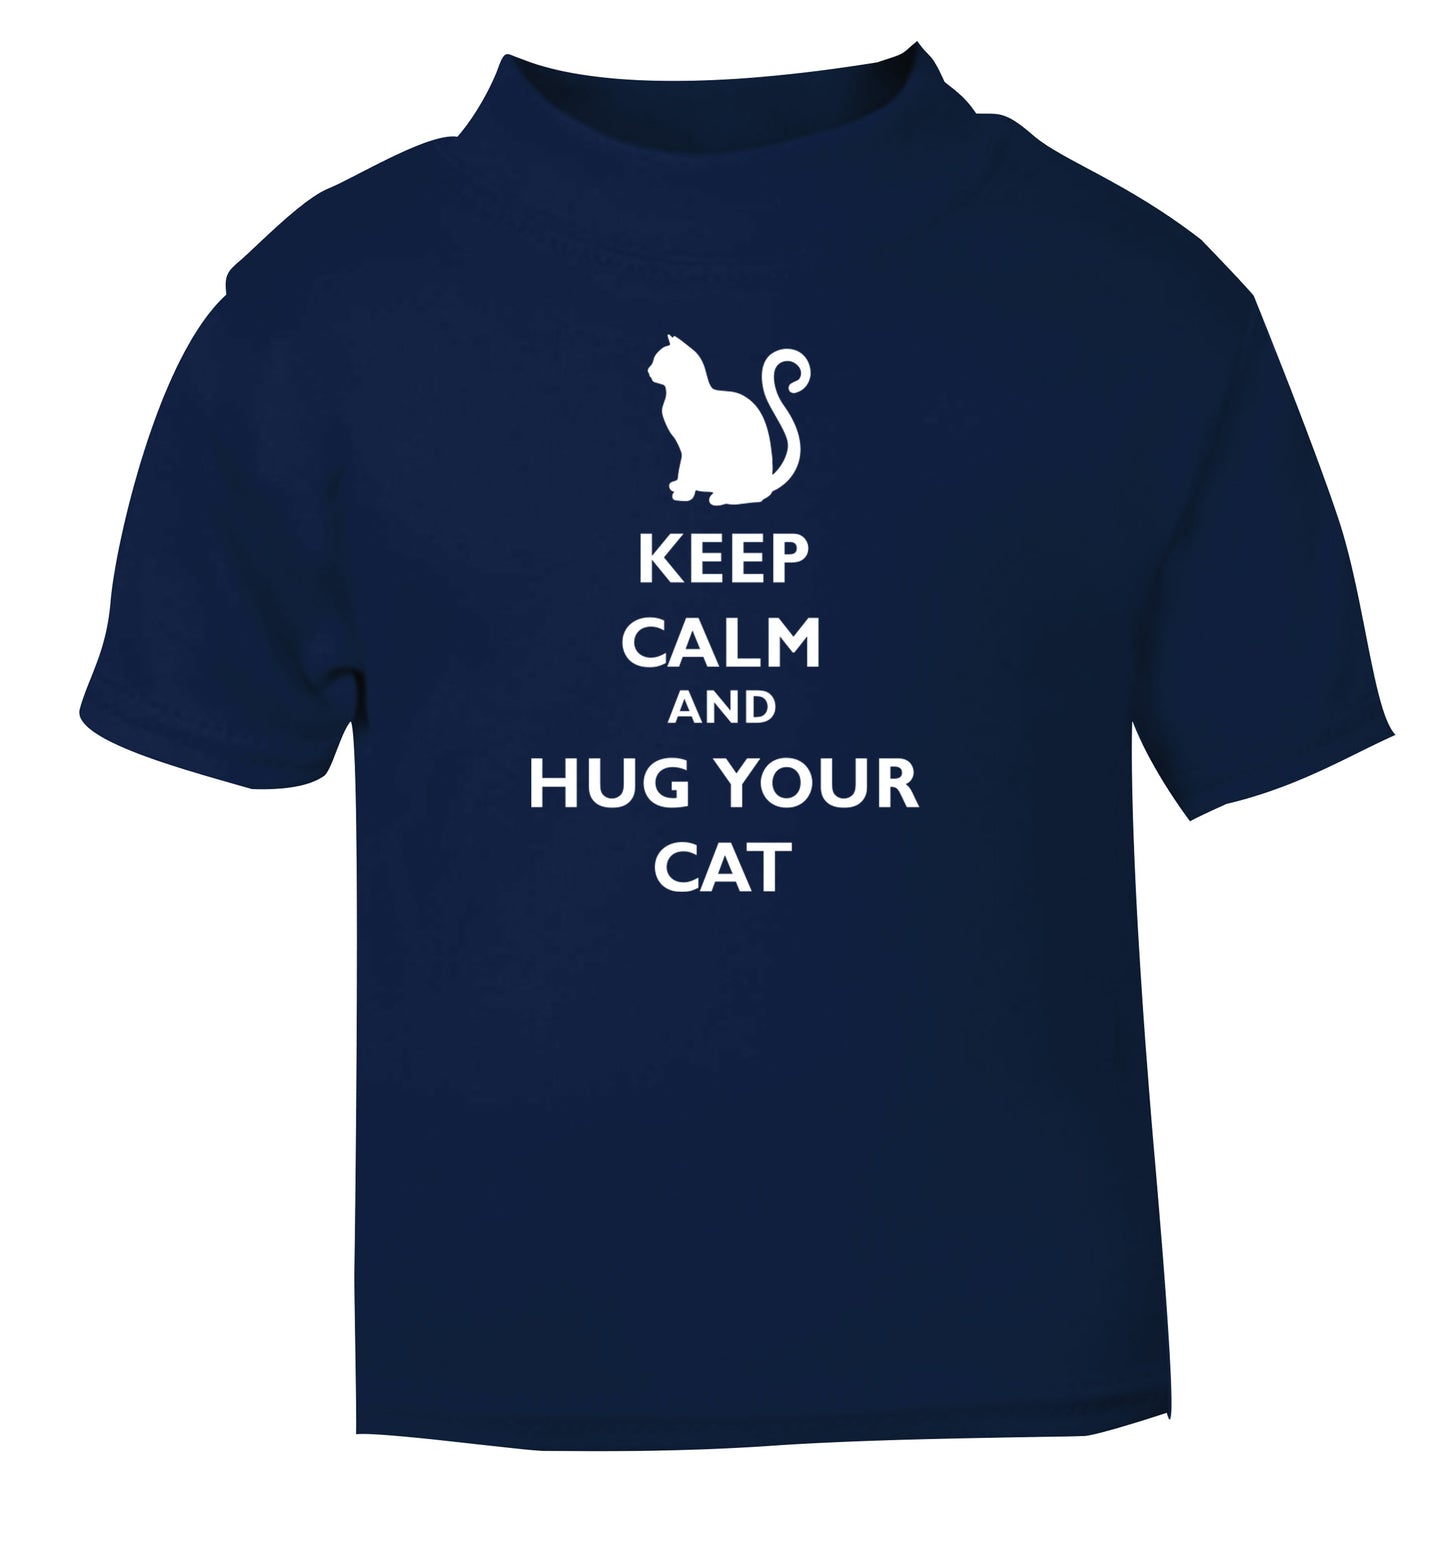 Keep calm and hug your cat navy Baby Toddler Tshirt 2 Years